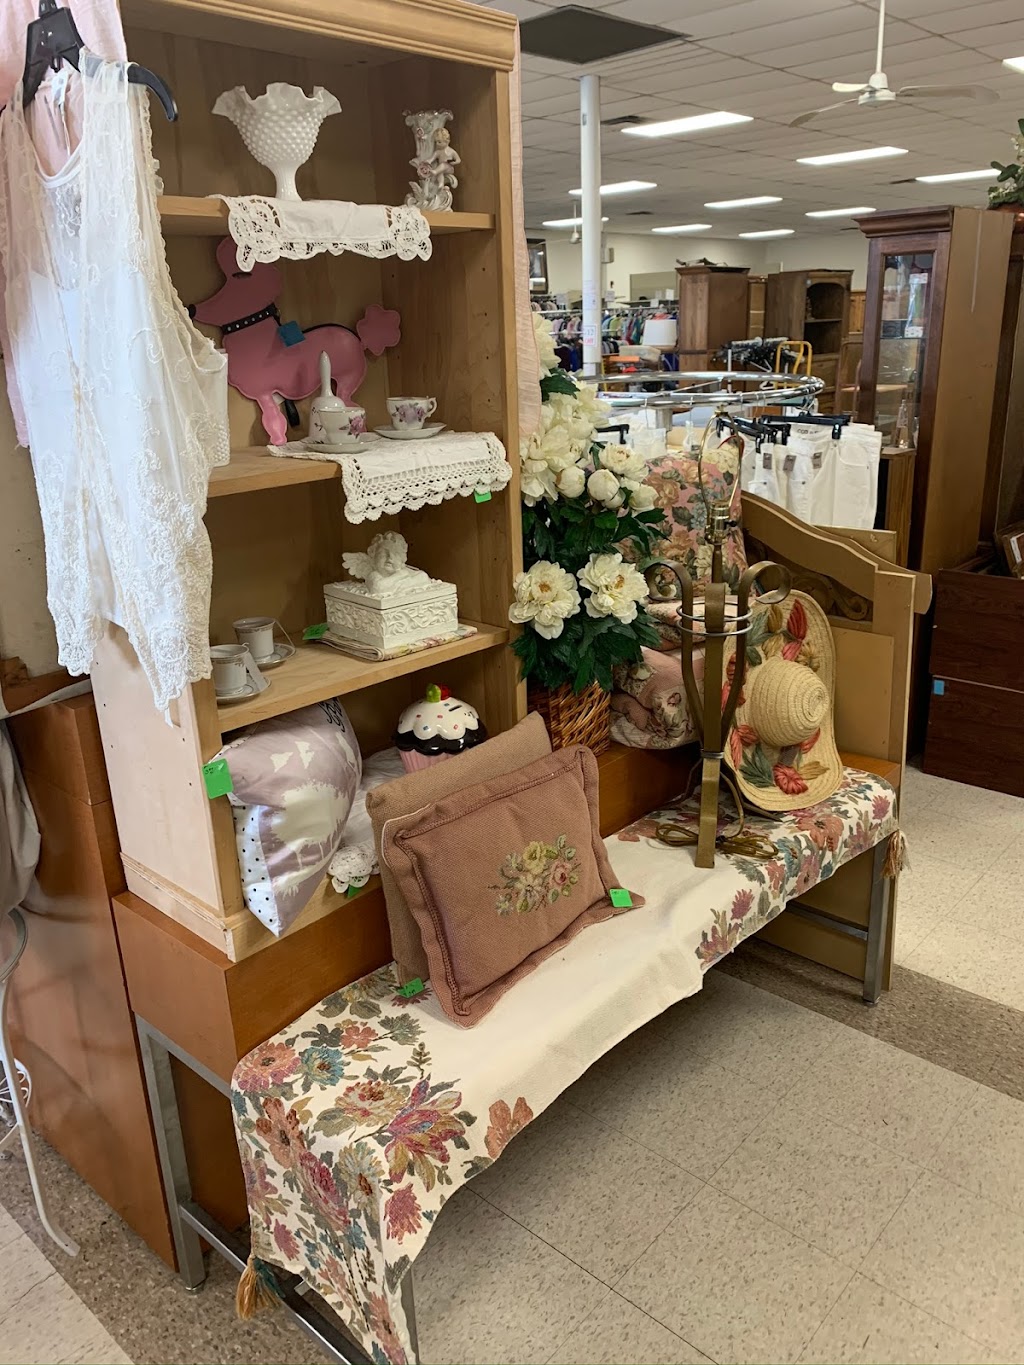 Lake County Missions Thrift Store | 415 N Grove St, Eustis, FL 32726, USA | Phone: (352) 357-7201